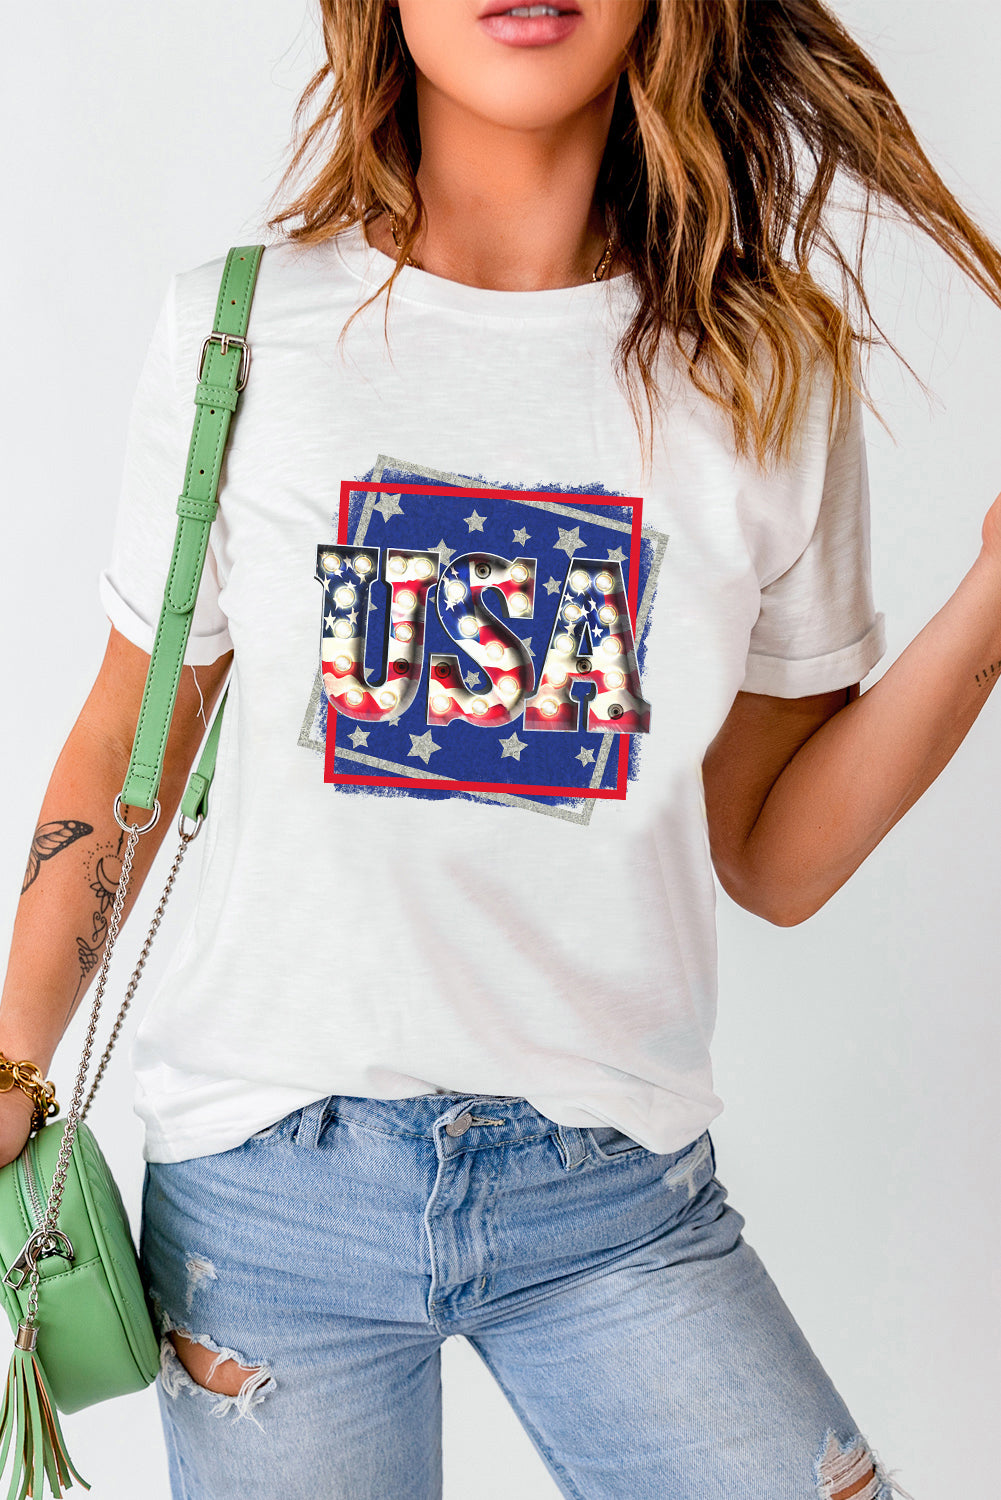 Patriotic USA Graphic Top Cuffed Short-Sleeve Tee Shirt
(Plus Size Available)